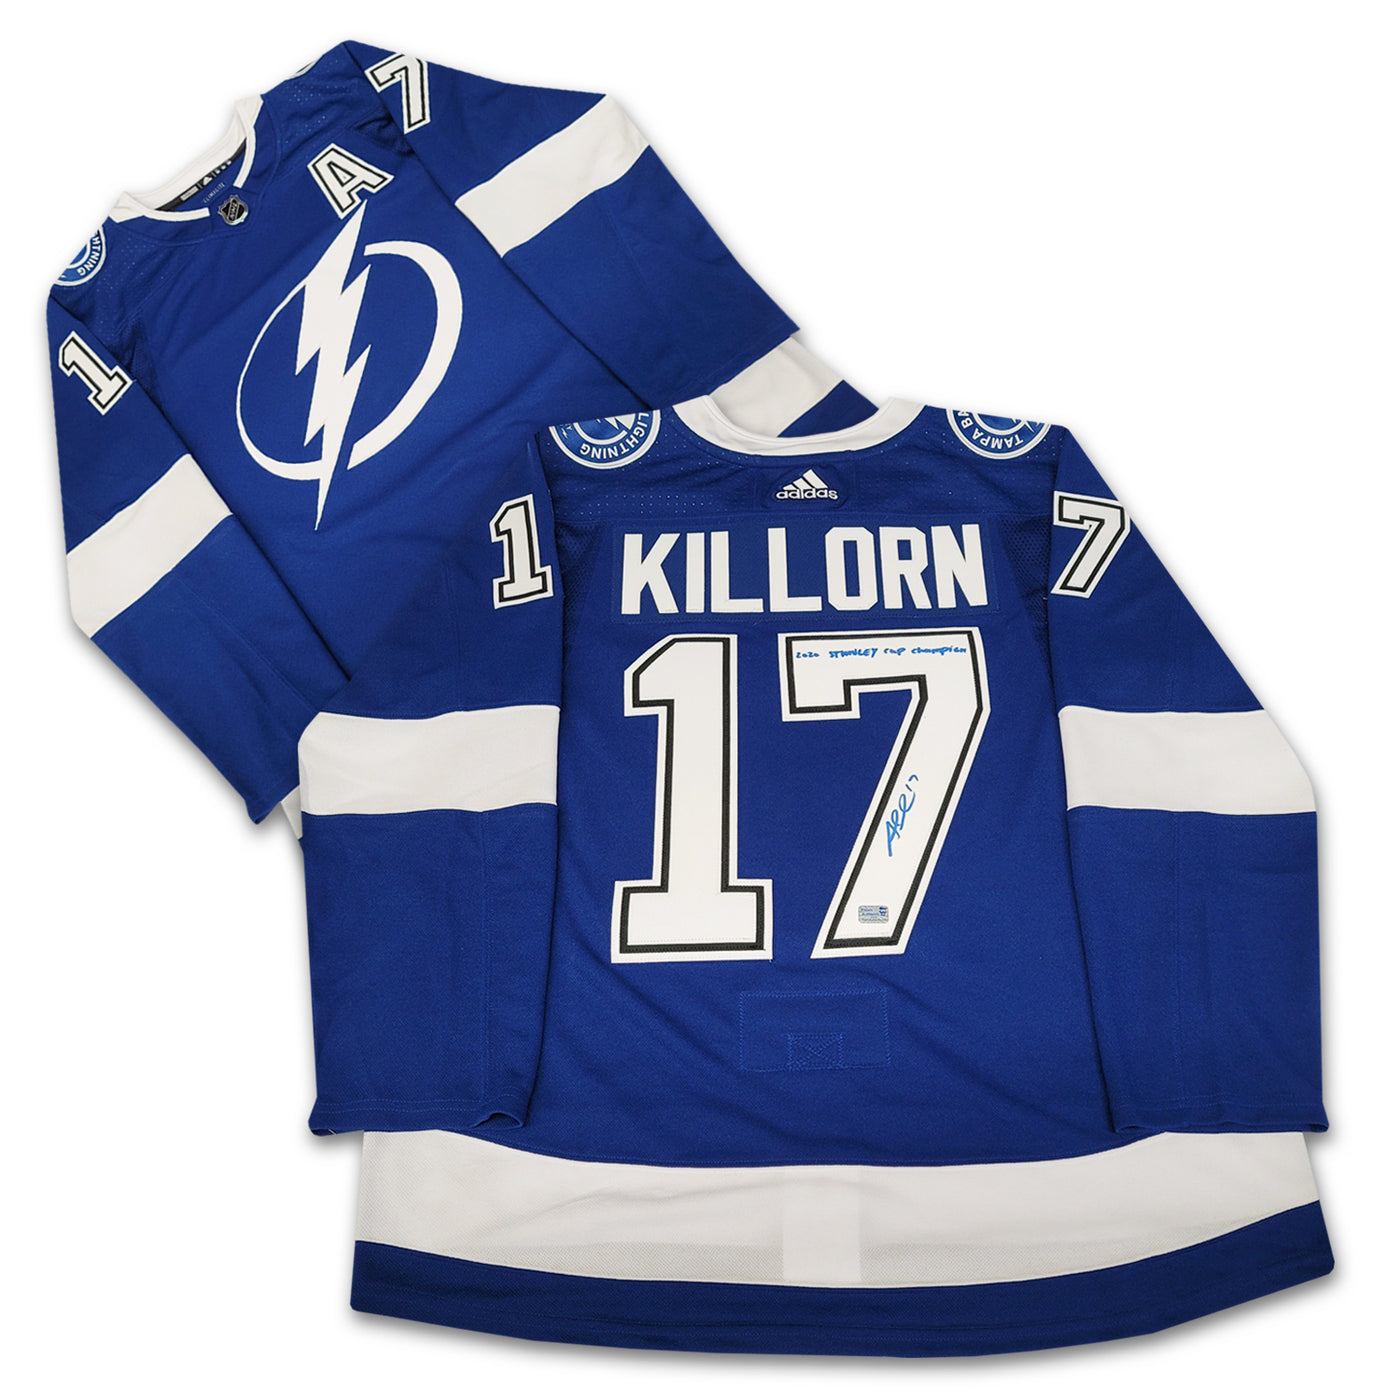 Alex Killorn Tampa Bay Lightning Adidas Jersey Inscribed 2020 Stanley Cup Champs